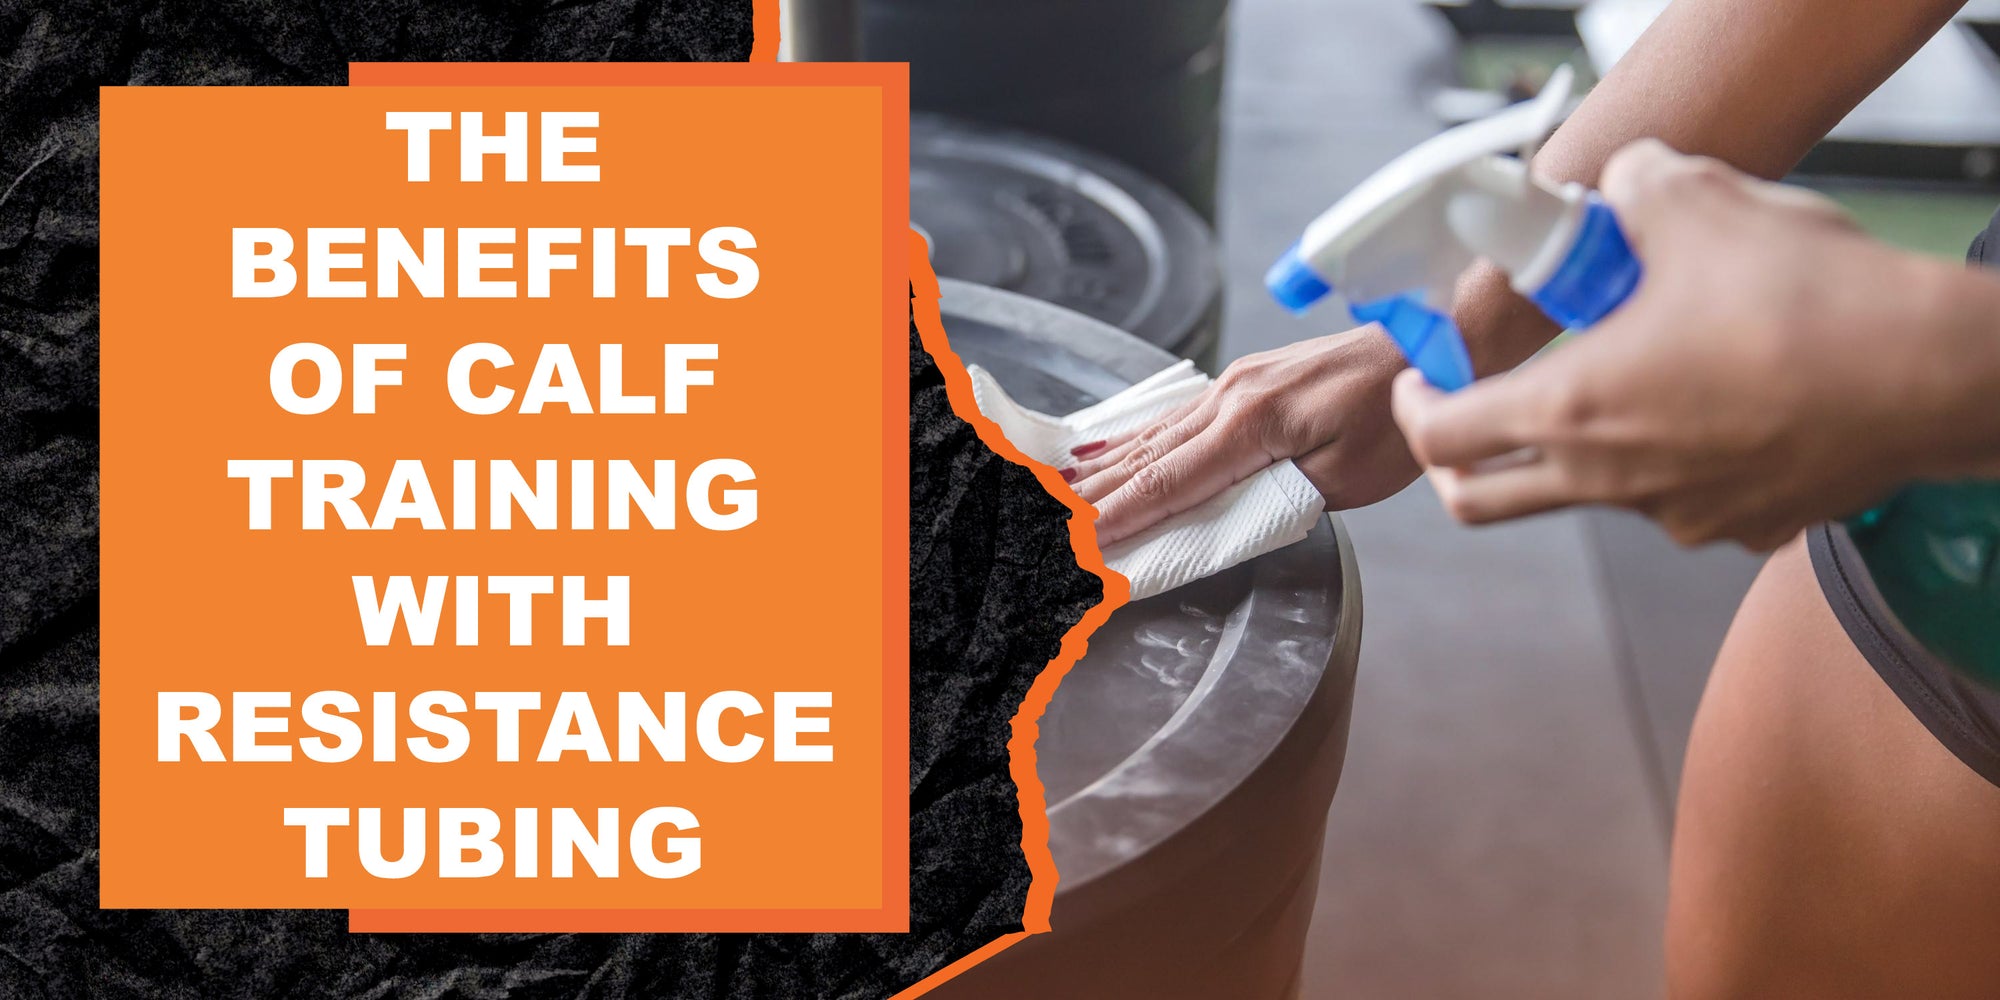 The Benefits of Calf Training with Resistance Tubing